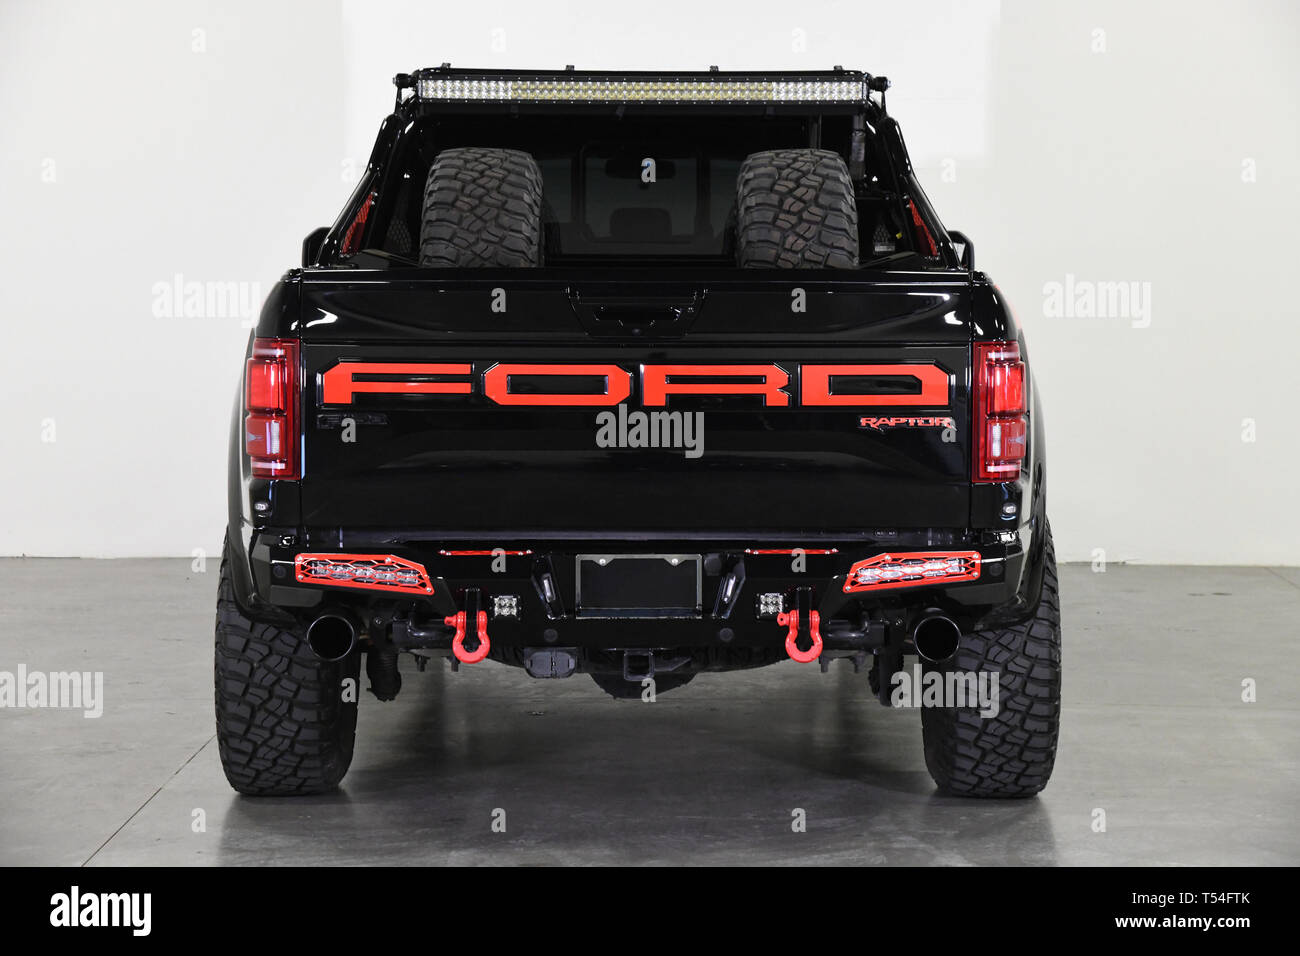 April 20, 2019: 2018 Ford F-150 SHELBY Raptor Baja 525HP Turbo FOX 3 2018 SHELBY BAHA RAPTOR! WE HAVE 7 PAGES OF ADDED SHELBY AND UPGRADE OPTIONS! CALL FOR A COPY. SONNY @ 972-523-9797 SHELBY BAJA RAPTOR $117460 ADDITIONAL INSTALLED UPGRADES $15357 FULL FORD AND SHELBY WARRANTY ONE OWNER CERTIFIED BAJA OPTION GROUP 525 HP 610 FPT PERFORMANCE UPGRADE OPTION LIST TO ECOBOOST TURBO SHELBY TUNED PERFORMANCE EXHAUST DUAL INTAKE BAJA HOOD FOX 3 RAPTOR STAGE 2 SHOCK SYSTEM 18'' BAJA WHEELS BFG MUDS 35/12.50/18 WITH TWO FULL SPARES XL POWER STEPS FRONT AND REAR SHELBY BUMPERS LED LED LED'S 40'' CUR Stock Photo